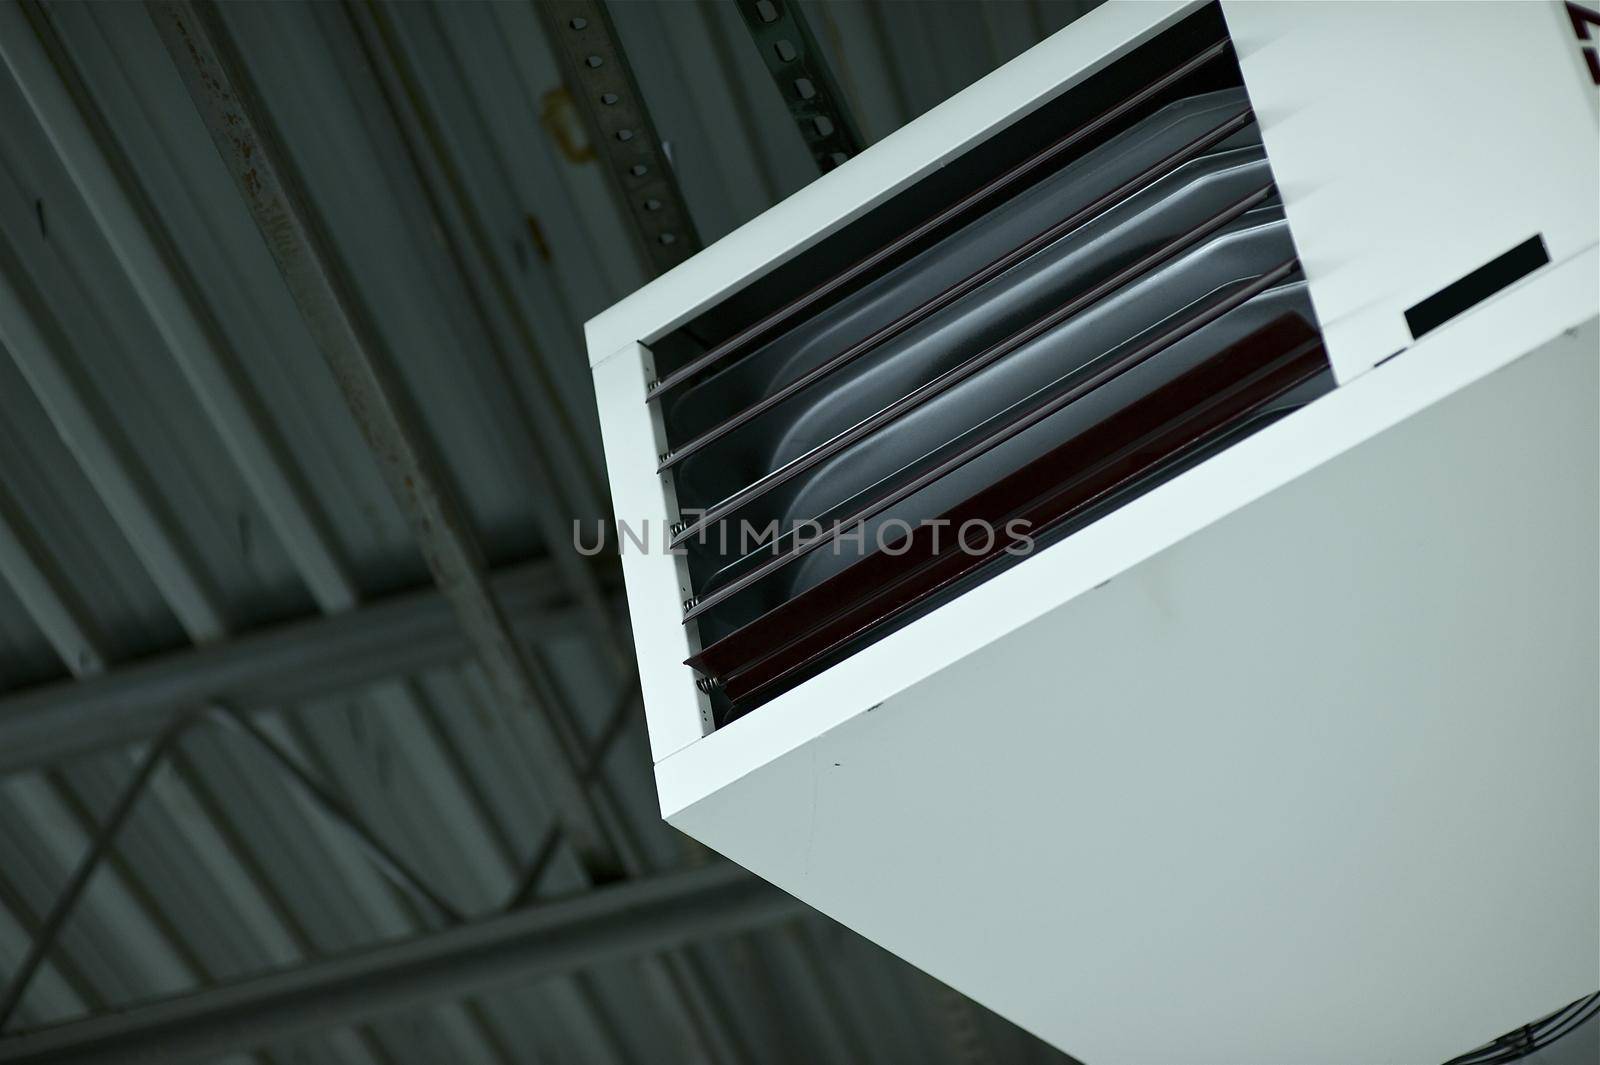 Heavy Duty Air Condition in the Warehouse by welcomia